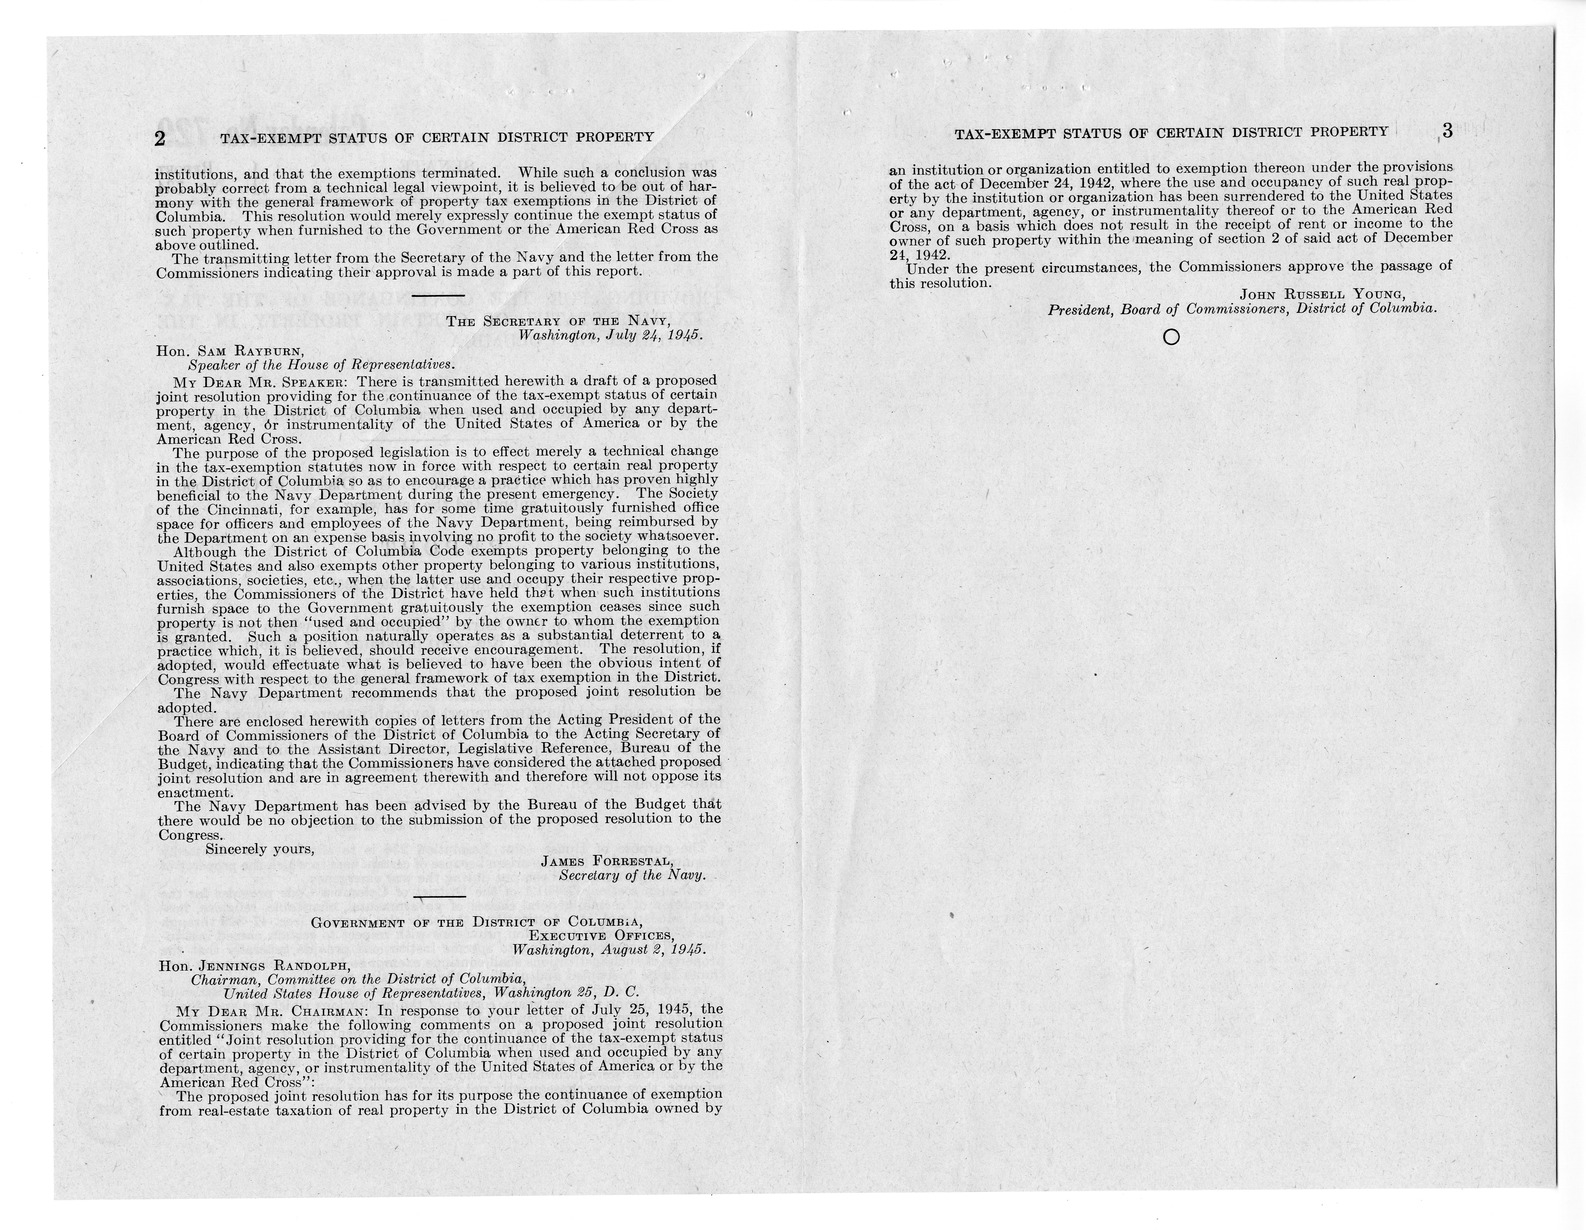 Memorandum from Frederick J. Bailey to M. C. Latta, H.J. Res. 236, Providing for the Continuance of the Tax-Exempt Status of Certain Property in the District of Columbia When Used and Occupied by Any Department, Agency, or Instrumentality of the United States of America or by the American Red Cross, with Attachments